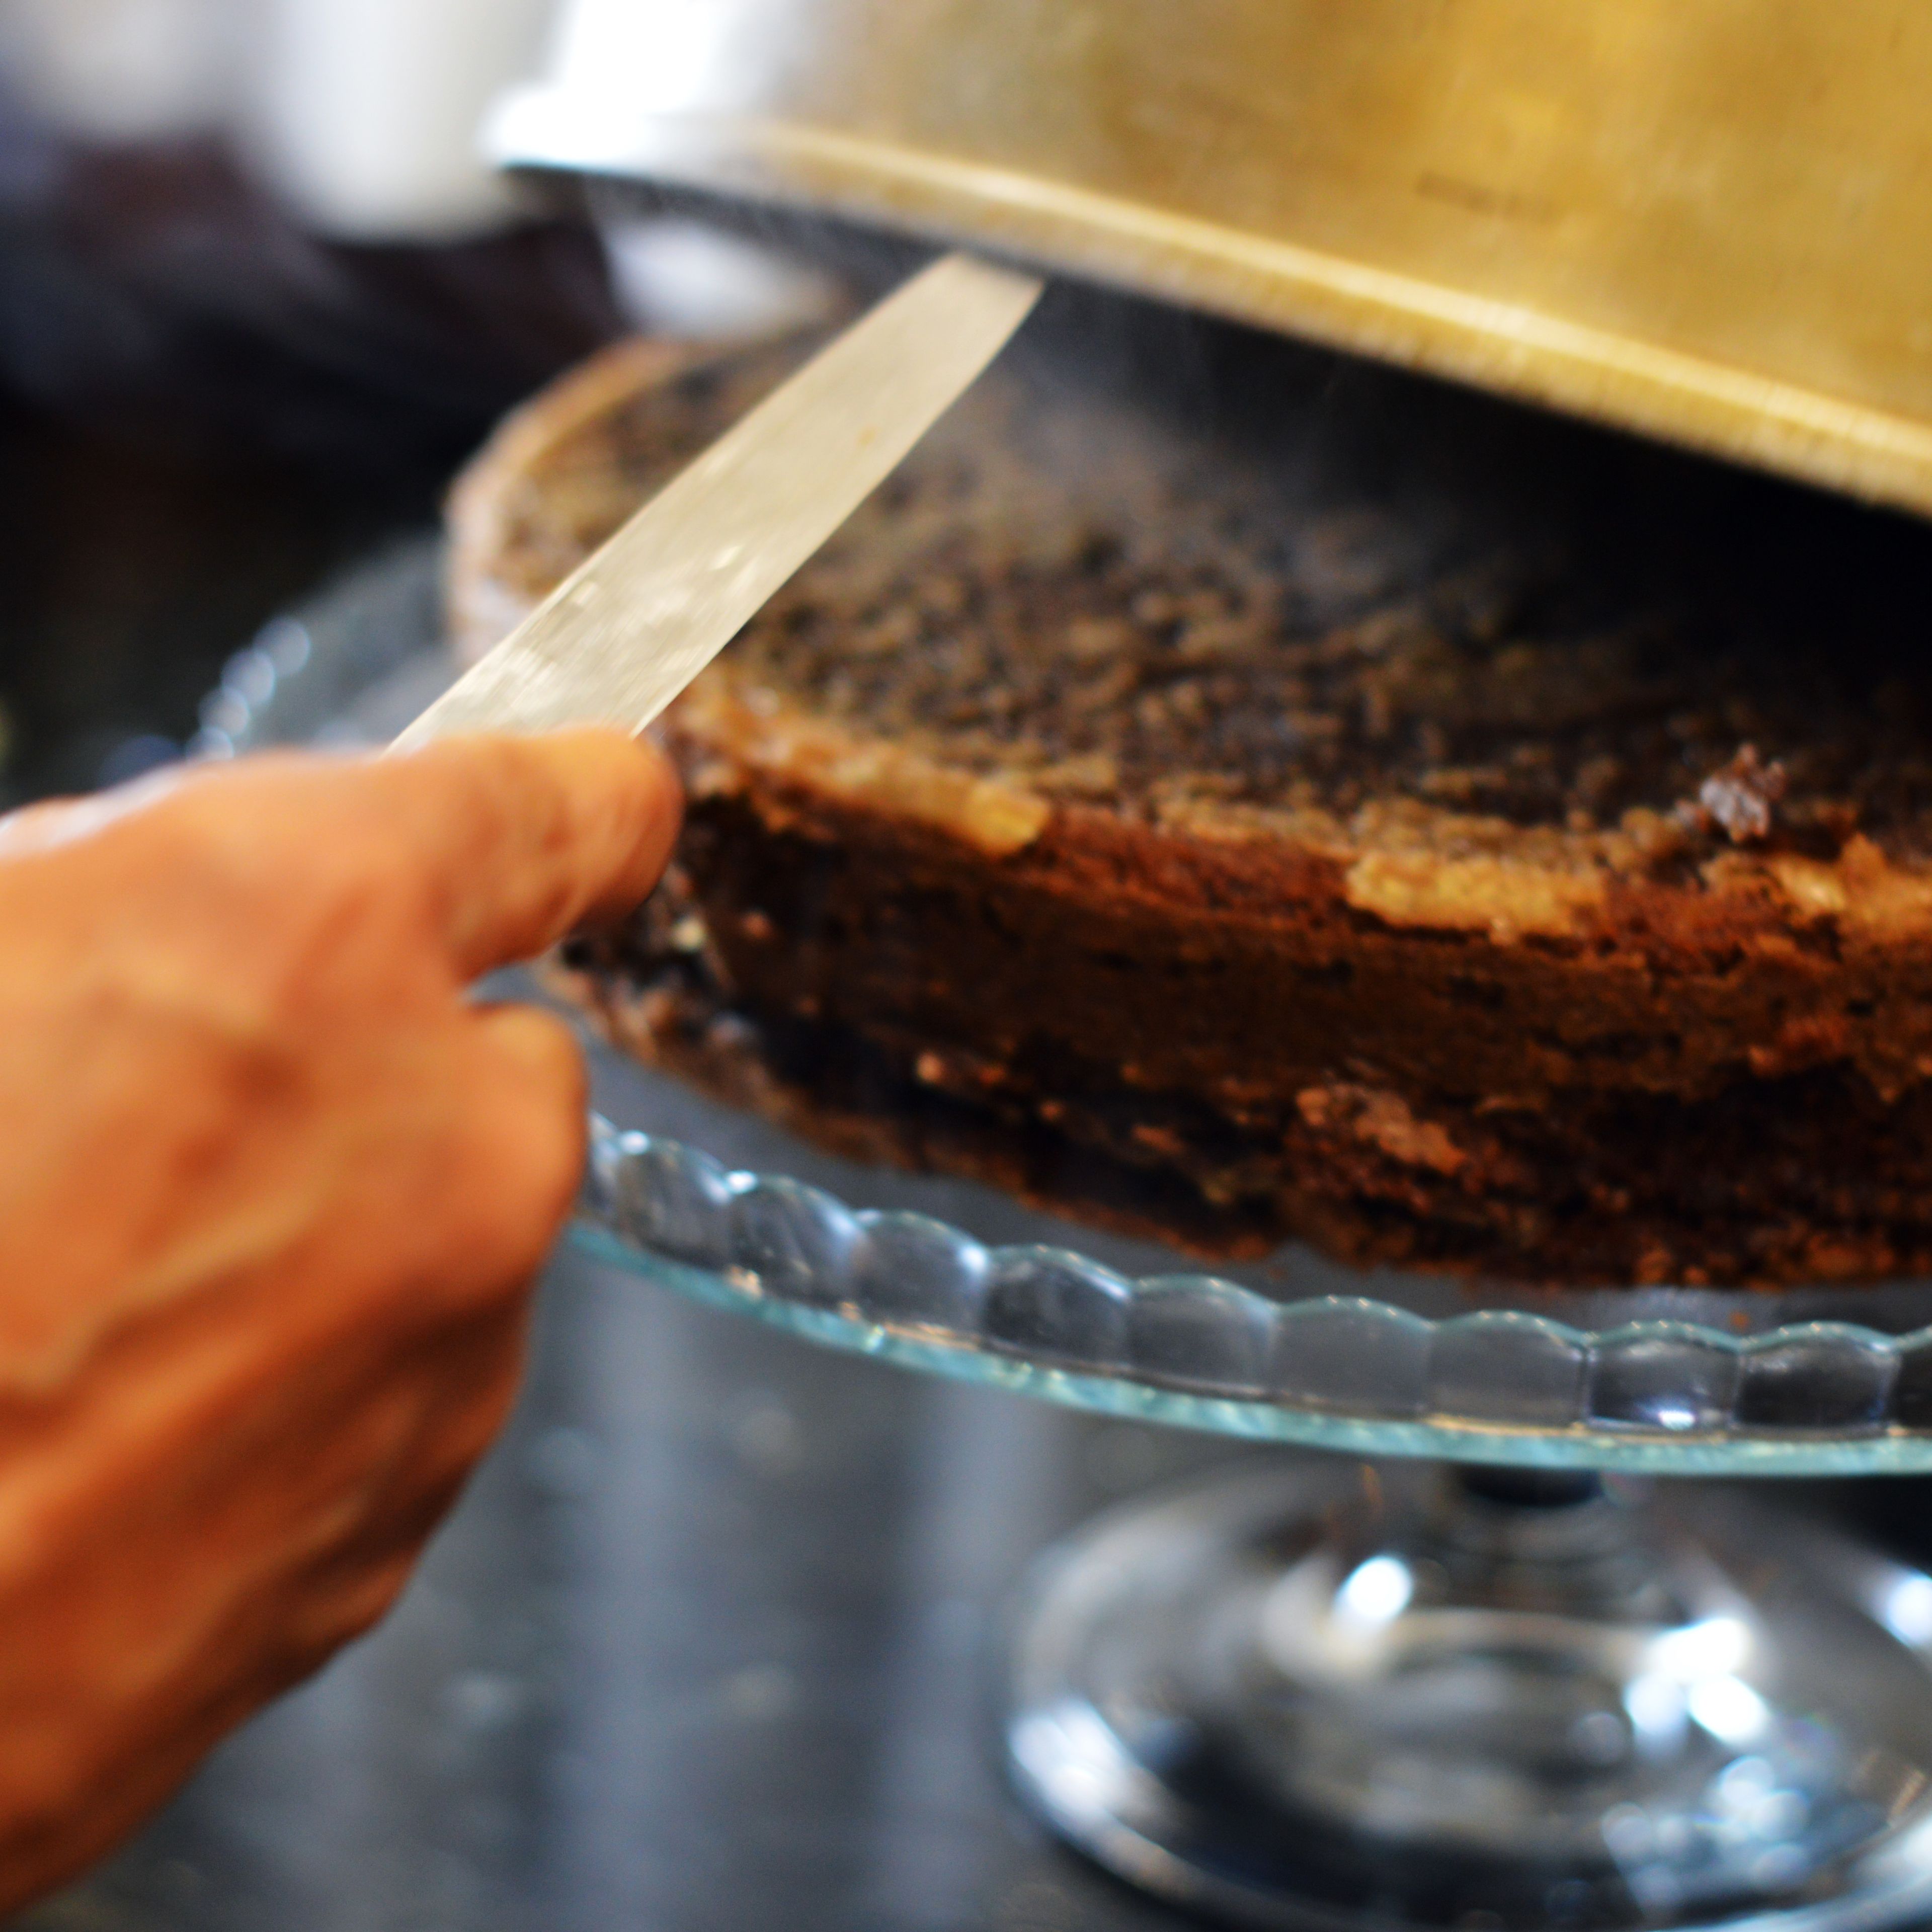 Unmold the cake while still hot and let it rest for a while.